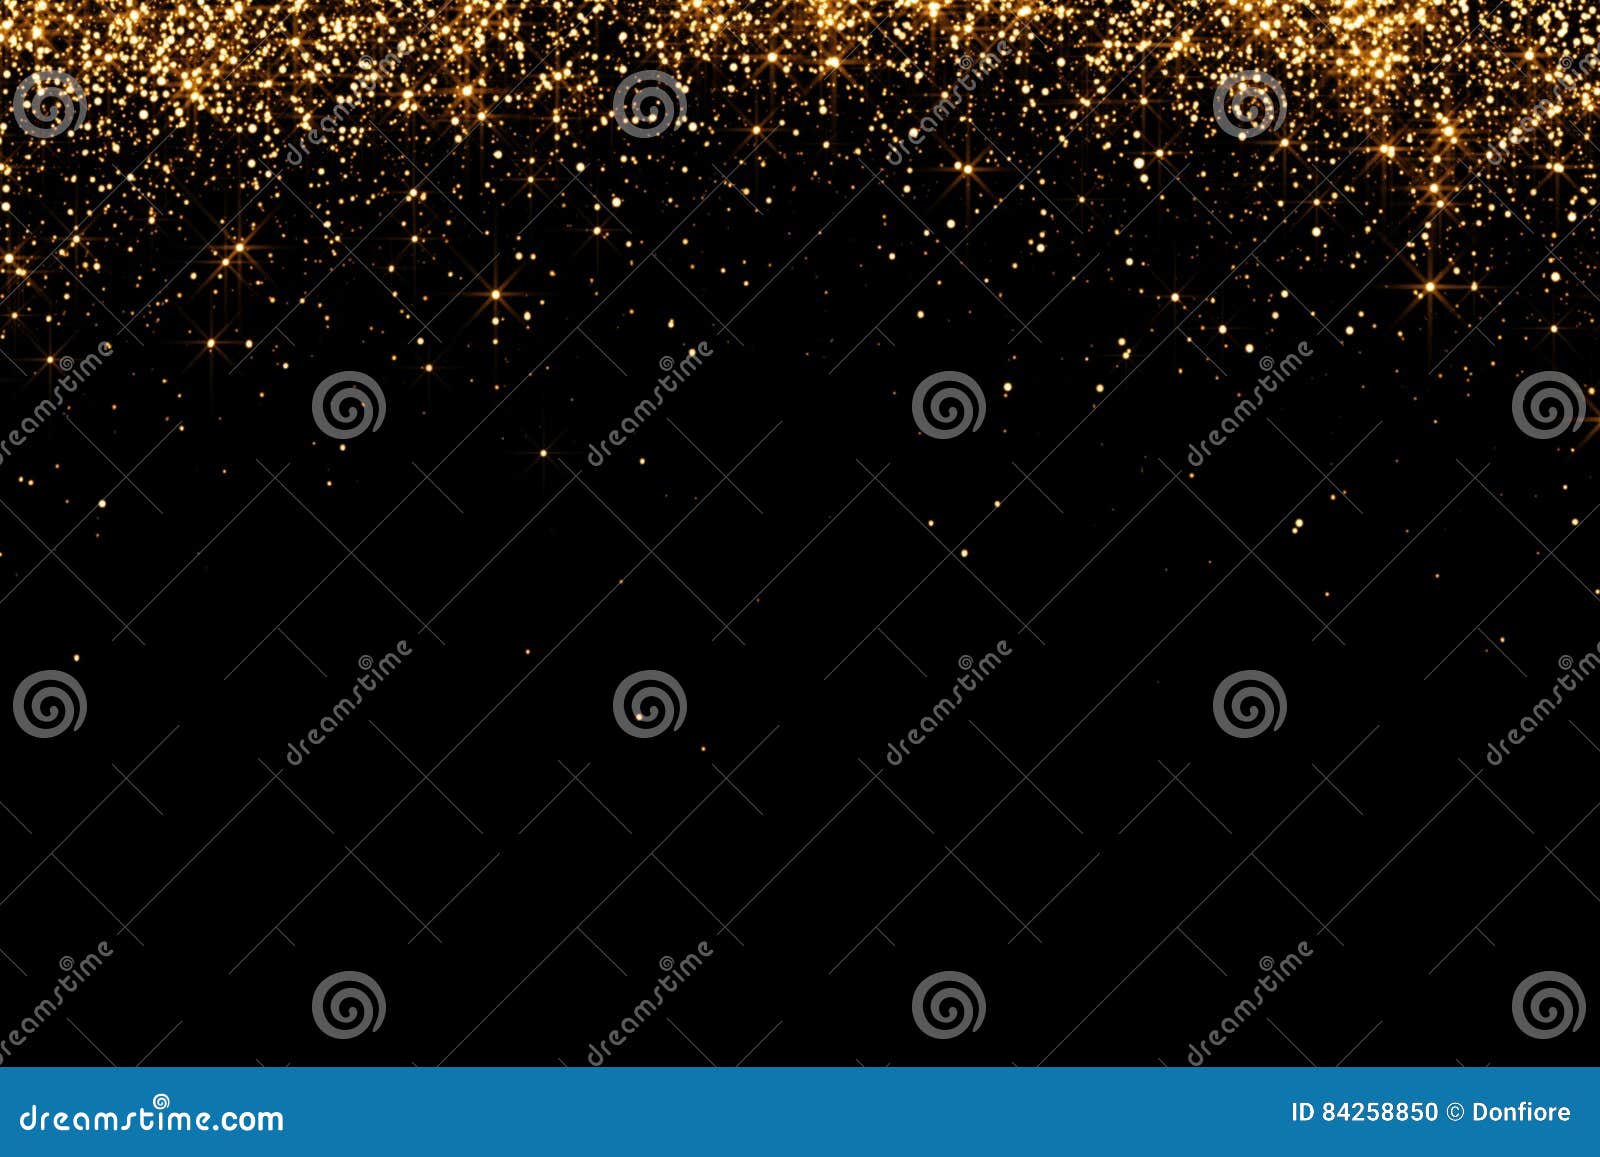 waterfalls of golden glitter sparkle bubbles champagne particles stars on black background, happy new year holiday